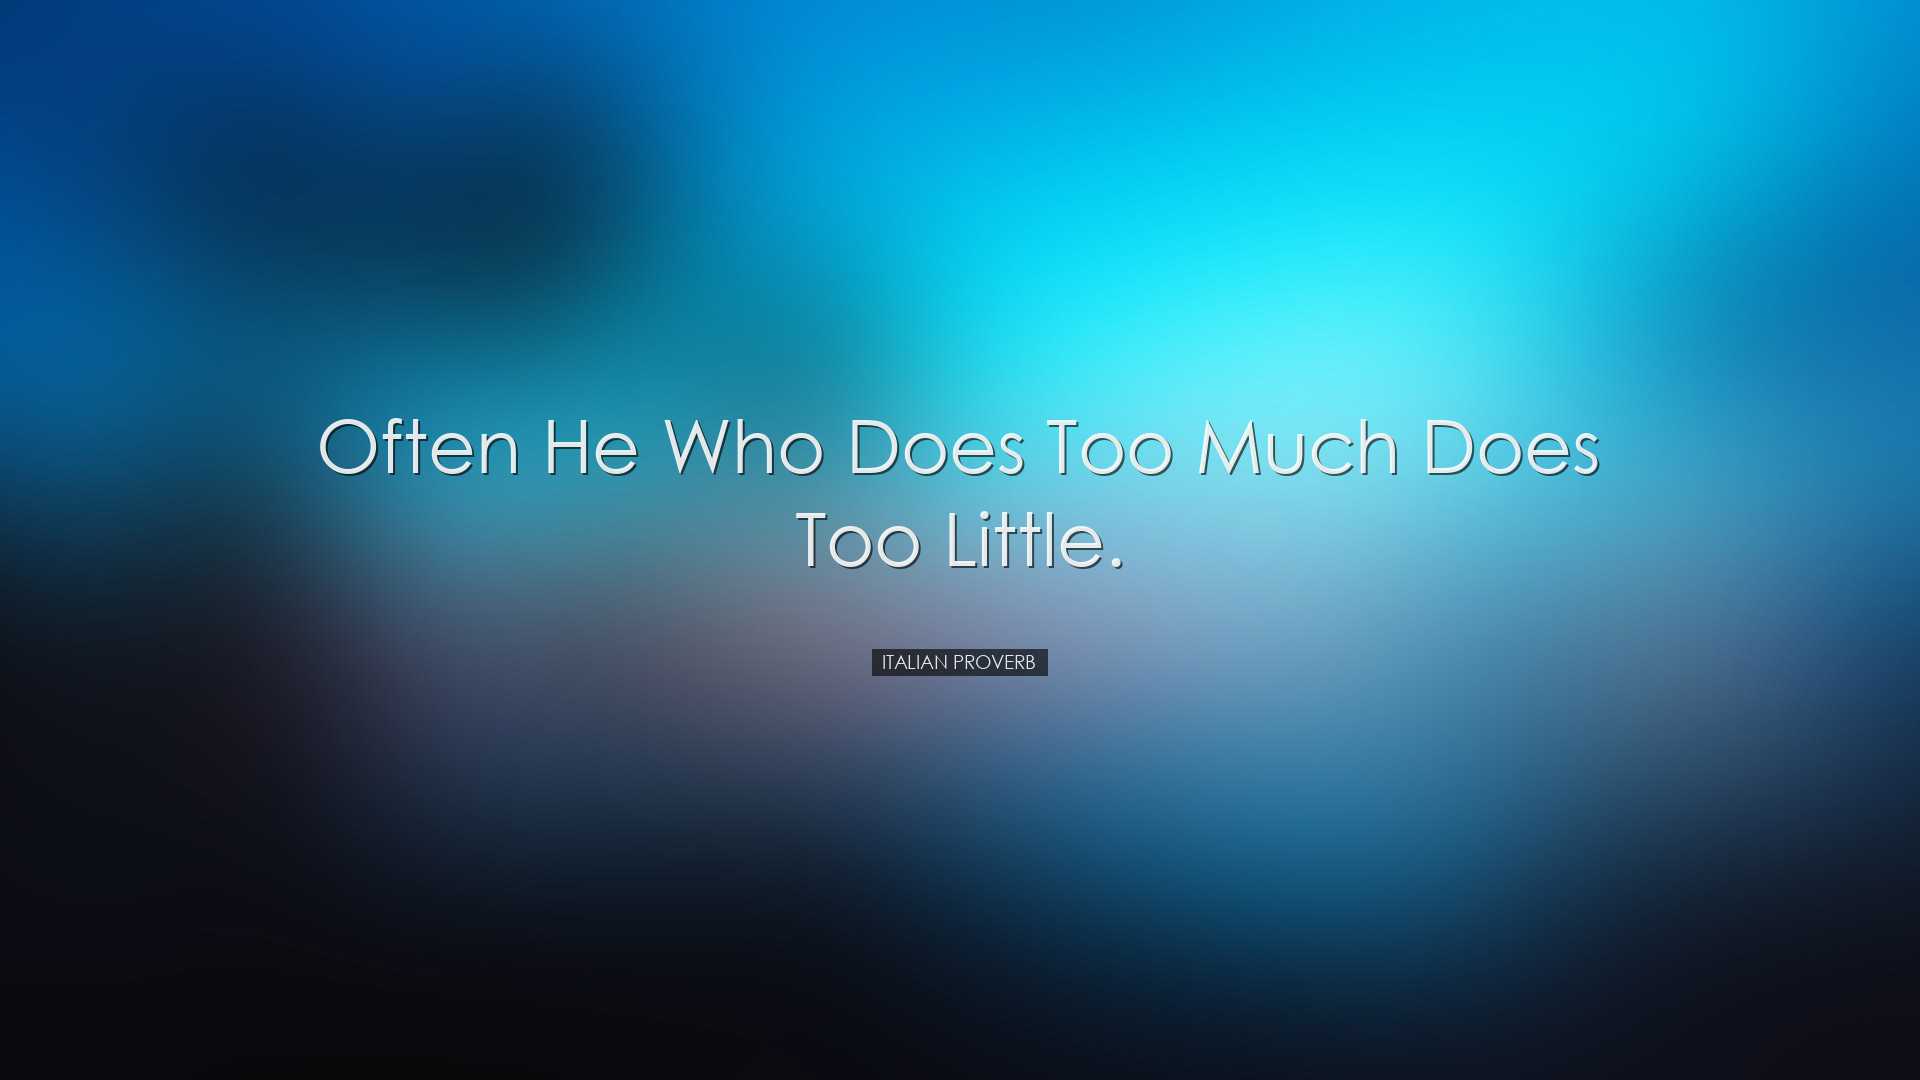 Often he who does too much does too little. - Italian Proverb